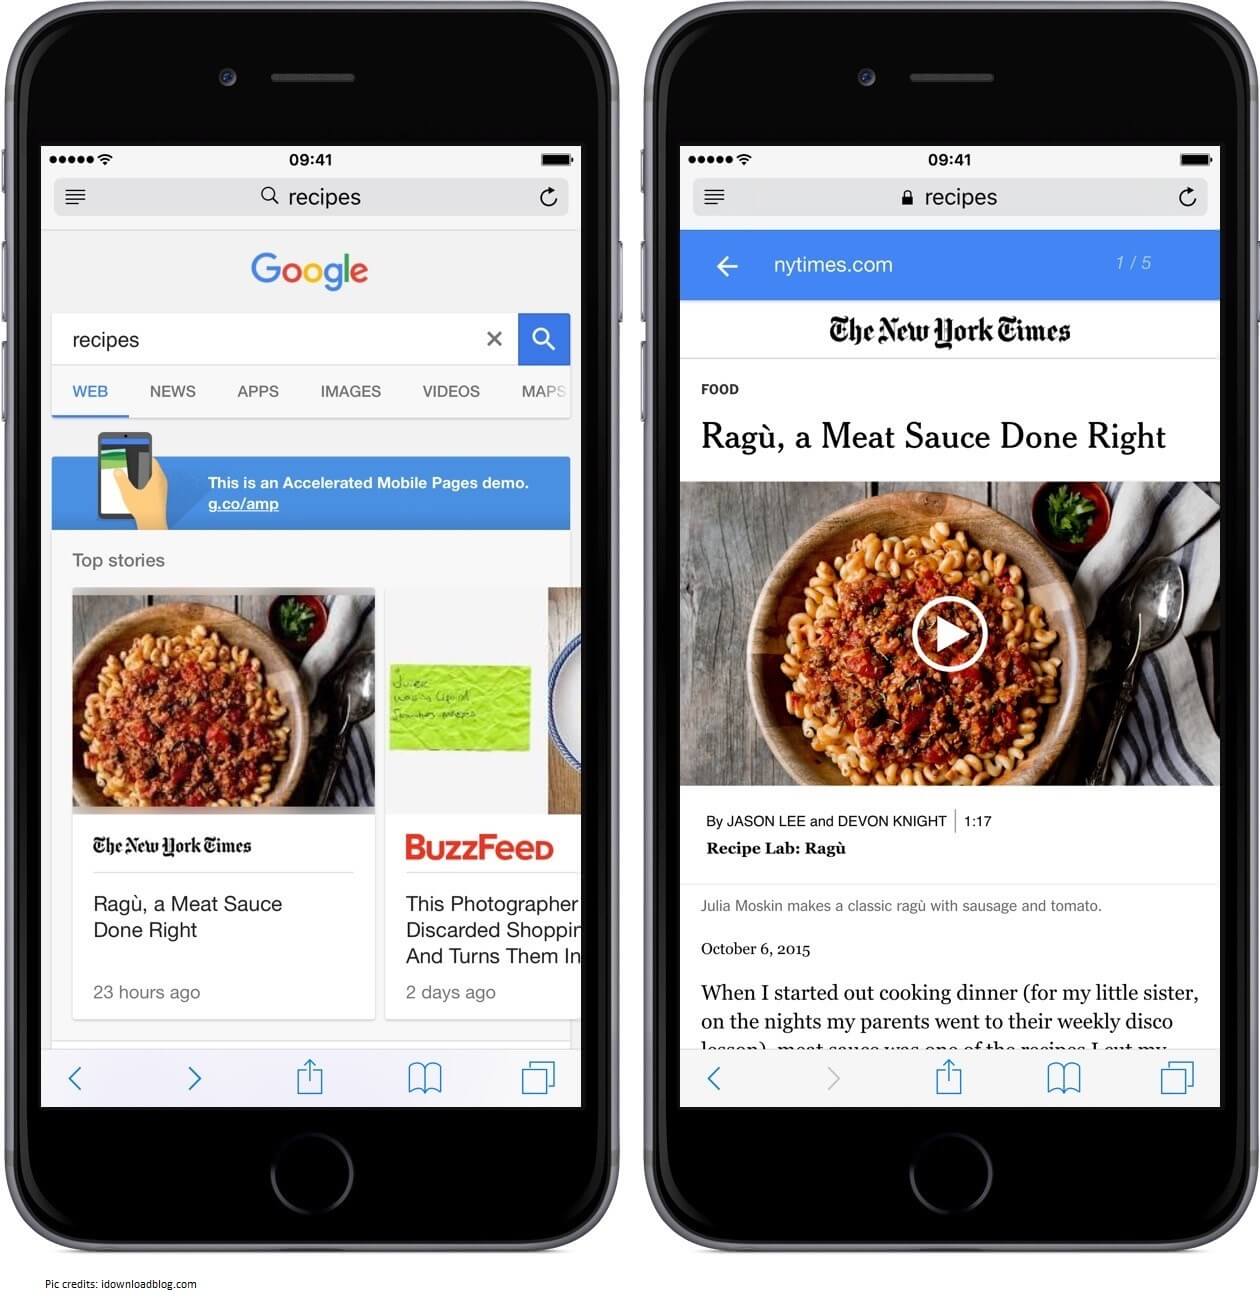 Google’s Accelerated Mobile Pages (AMP) for faster loading web pages